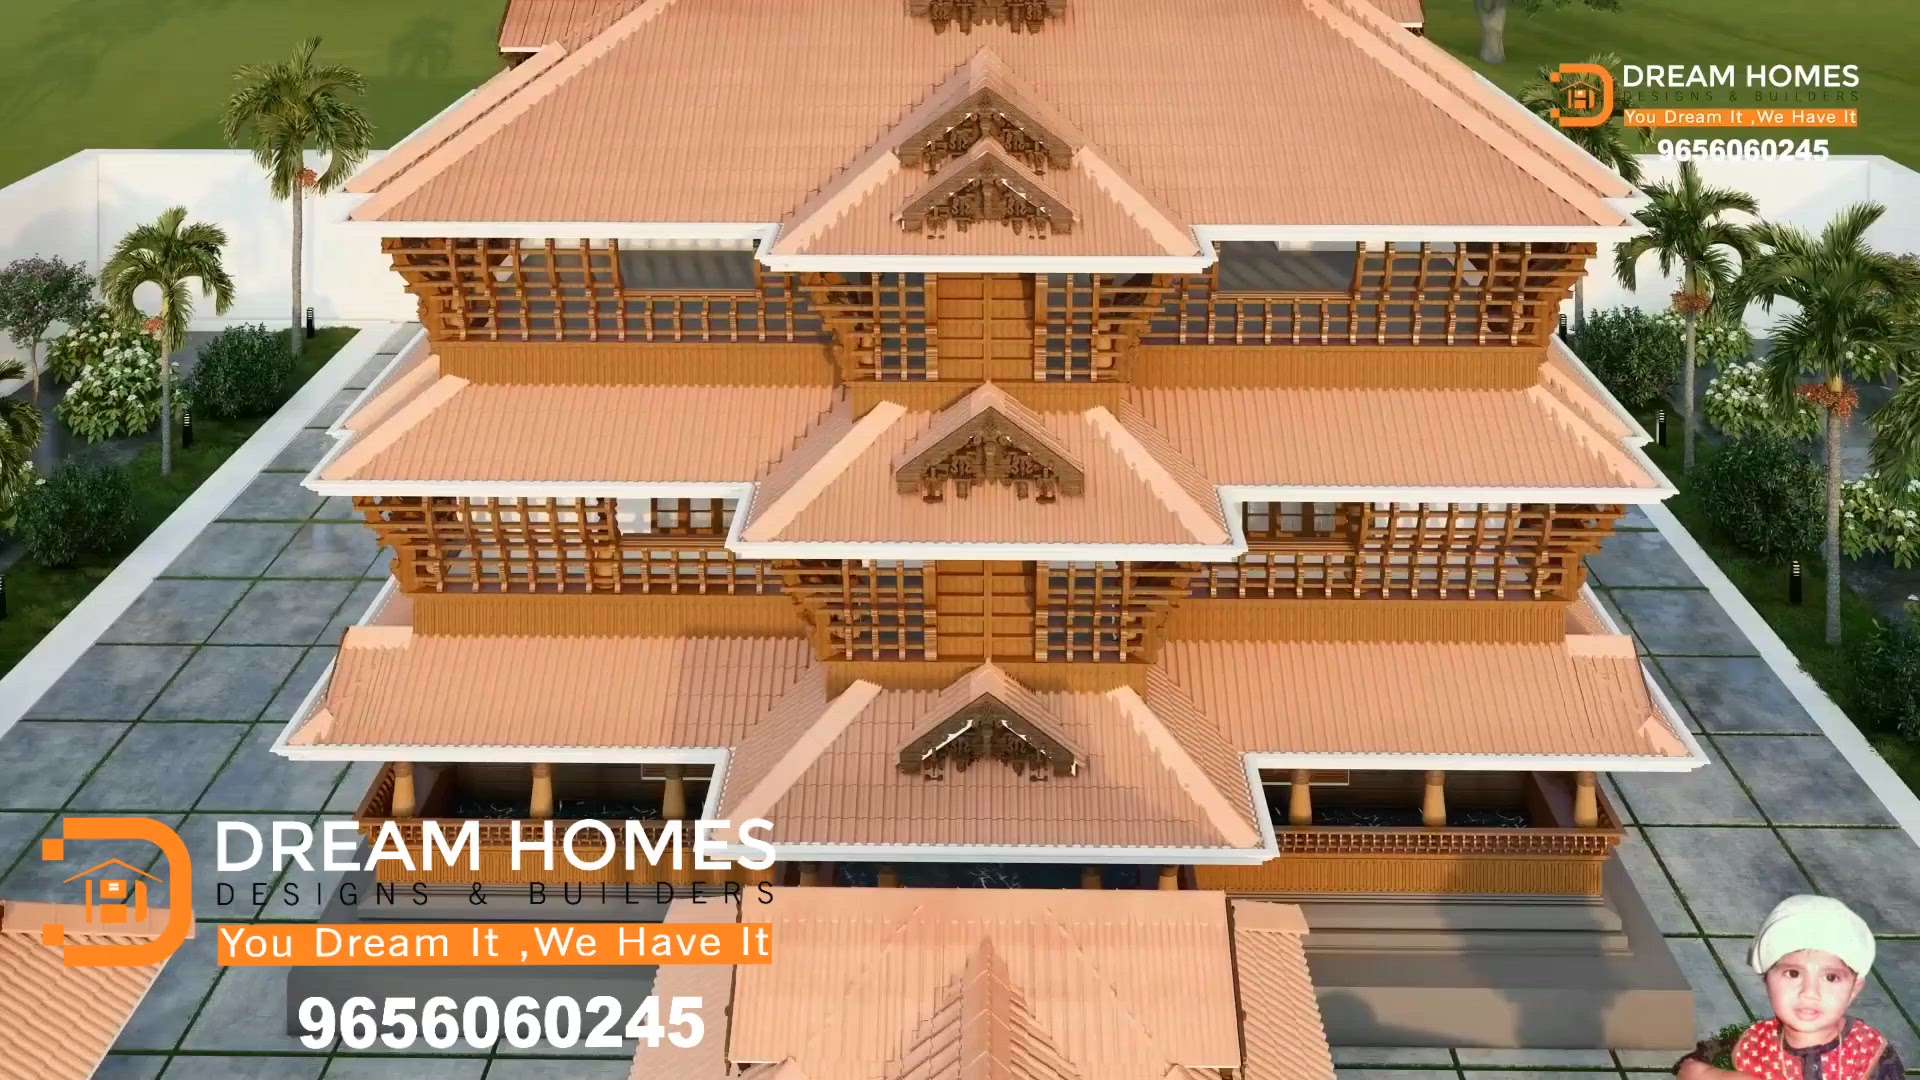 "DREAM HOMES DESIGNS & BUILDERS "
You Dream It, We Have It'

       "Kerala's No 1 Architect for Traditional Homes"

A beautiful traditional structure  will be completed only with the presence of a good Architect and pure Vasthu Sastra.

Dream Homes will always be there whenever we are needed.

No Compromise on Quality, Sincerity & Efficiency.

We are providing service to all over India 
No Compromise on Quality, Sincerity & Efficiency.

For more info 
9656060245
7902453187